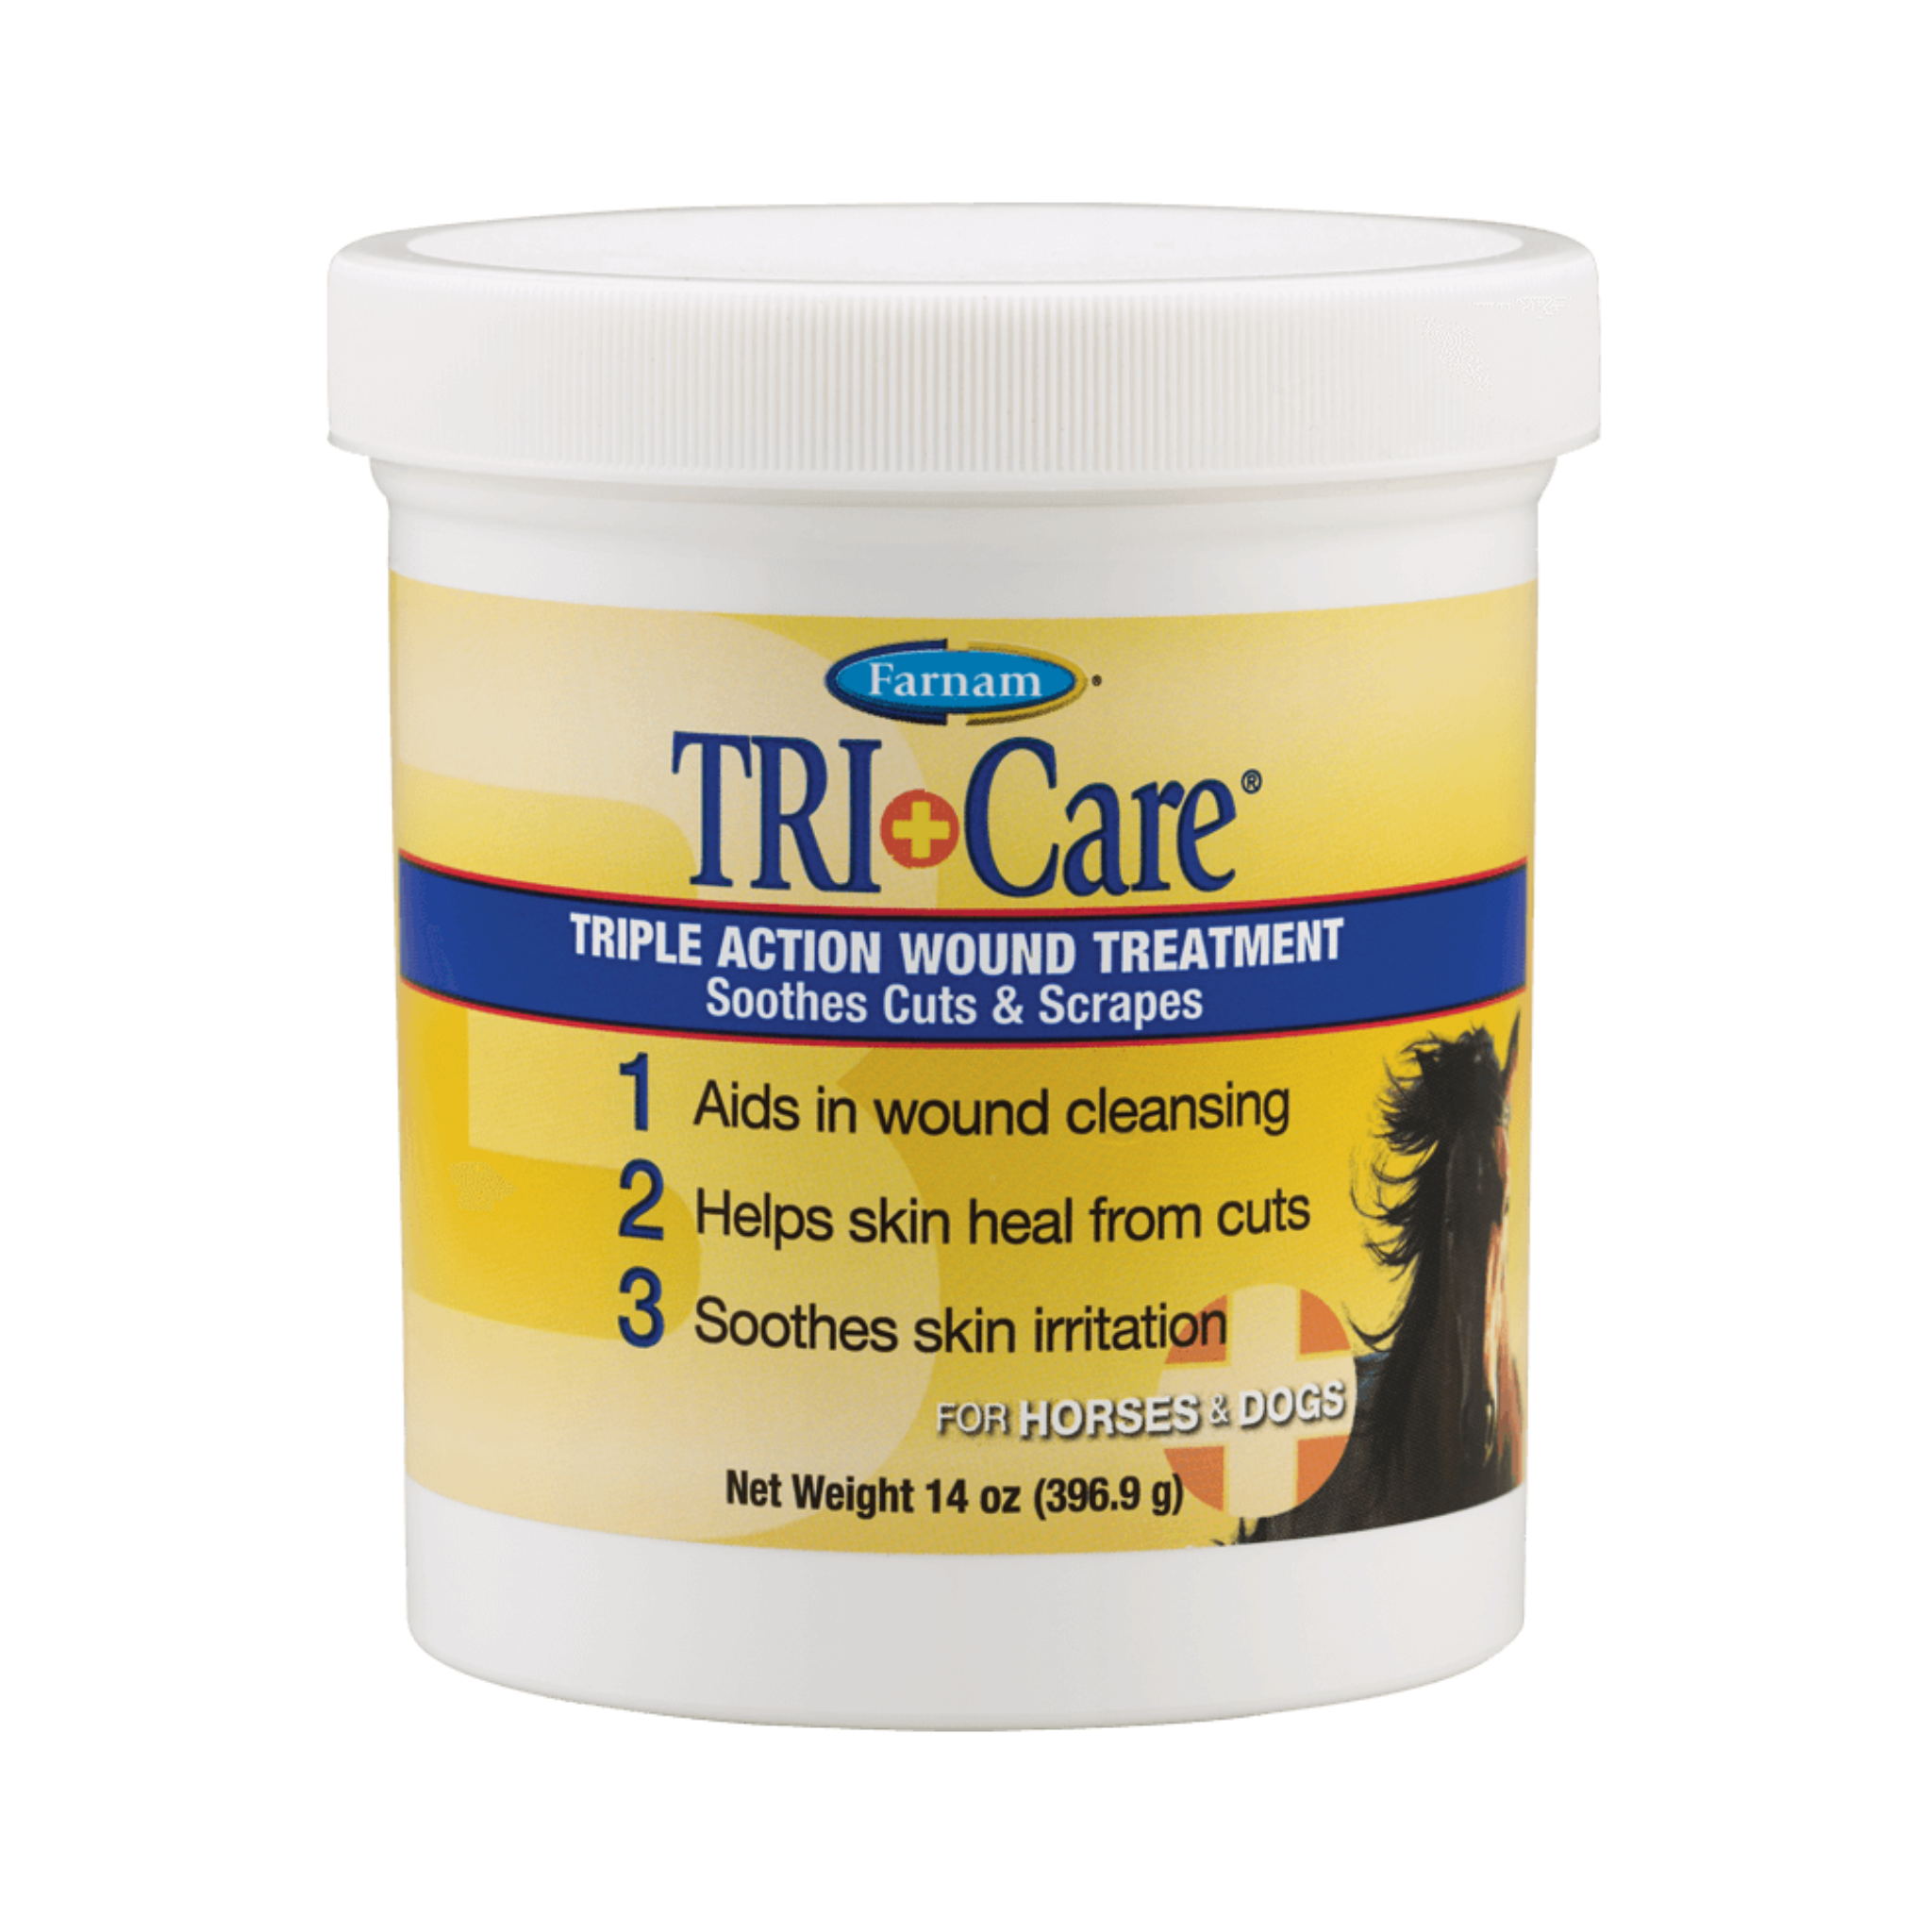 Farnam Tri-Care Triple Action Wound Ointment